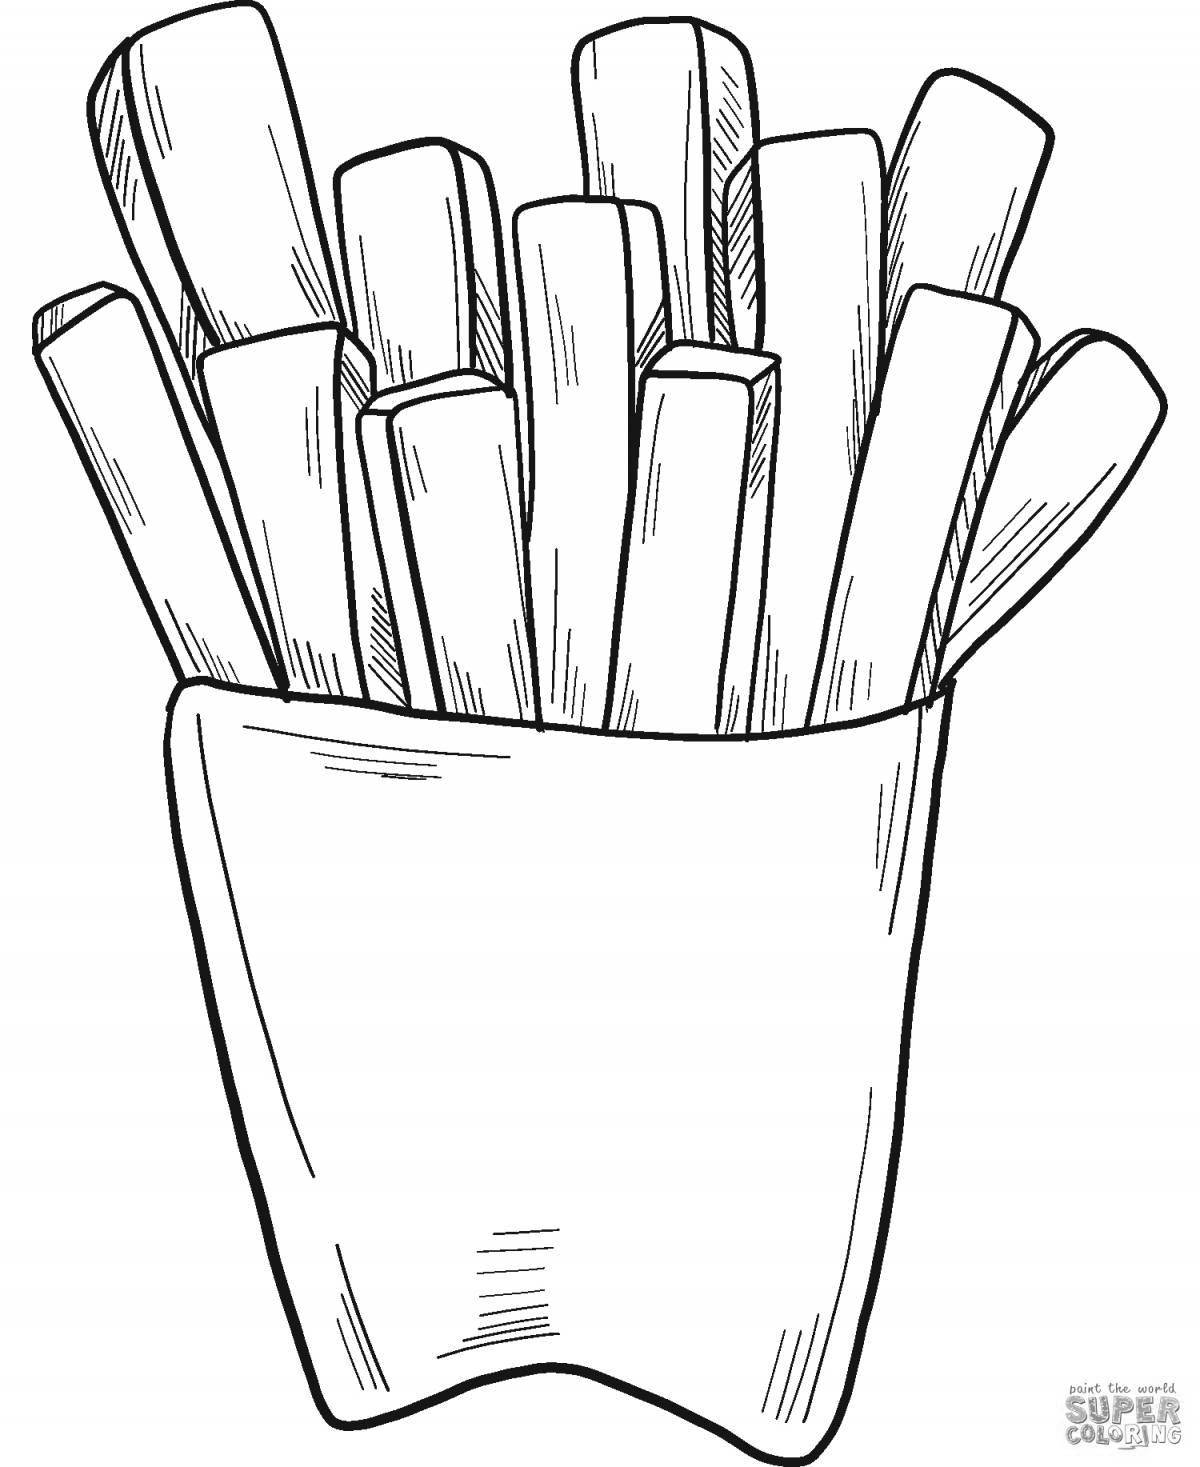 Fun french fries coloring book for kids